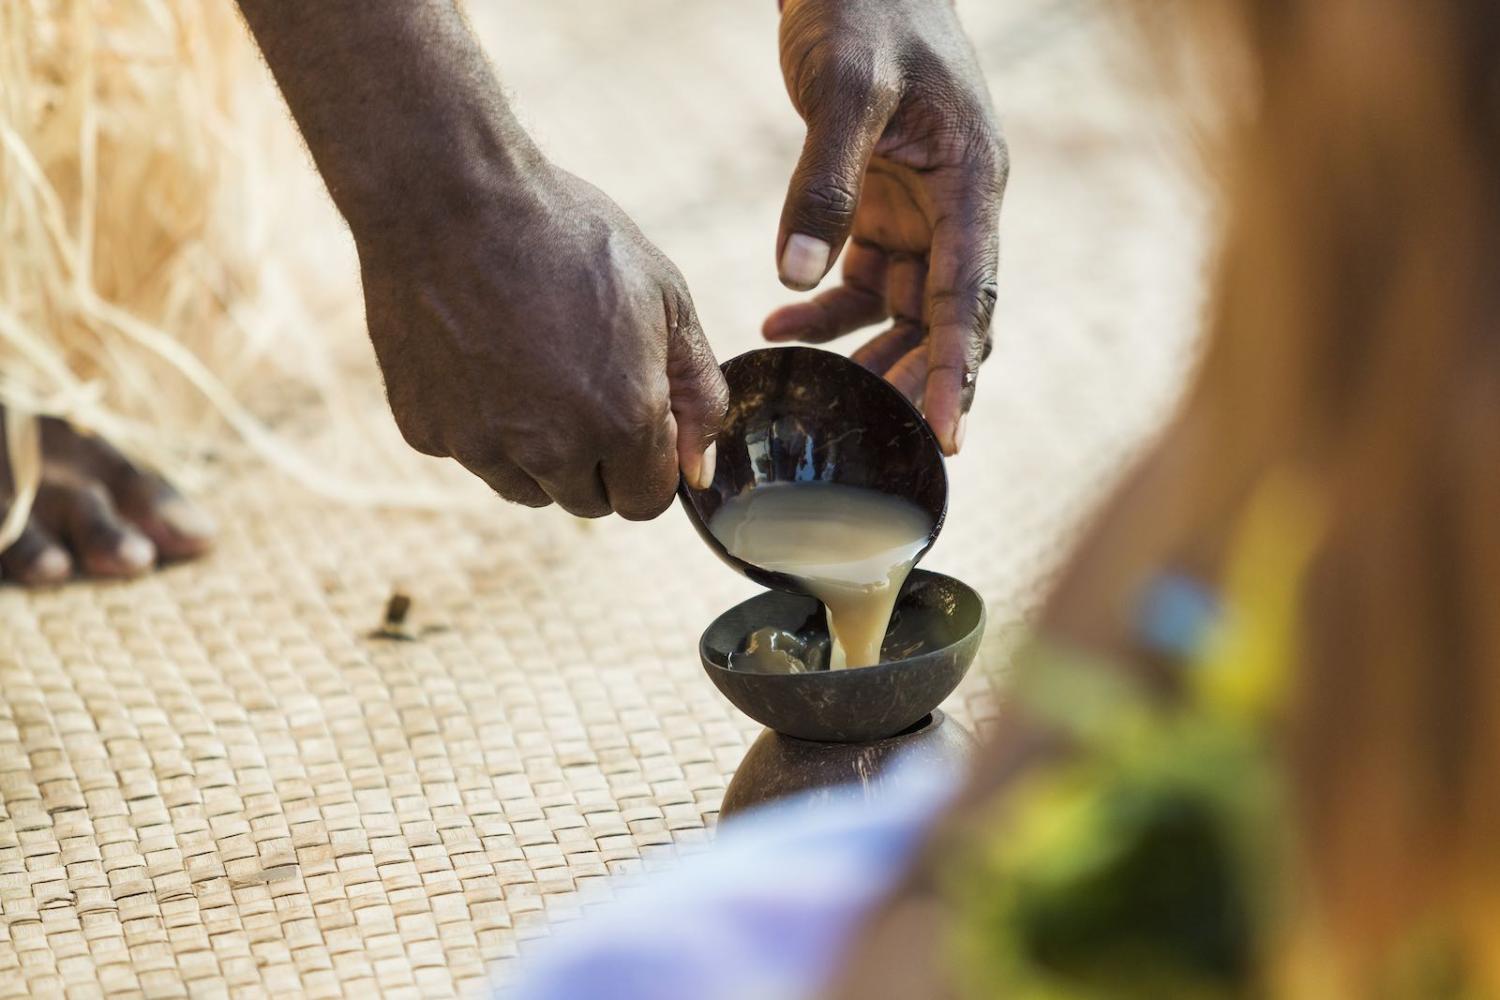 A new kava bar has opened in Auckland, but its commercial sale remains banned in Australia (Photo: Kelly Cestari via Getty)